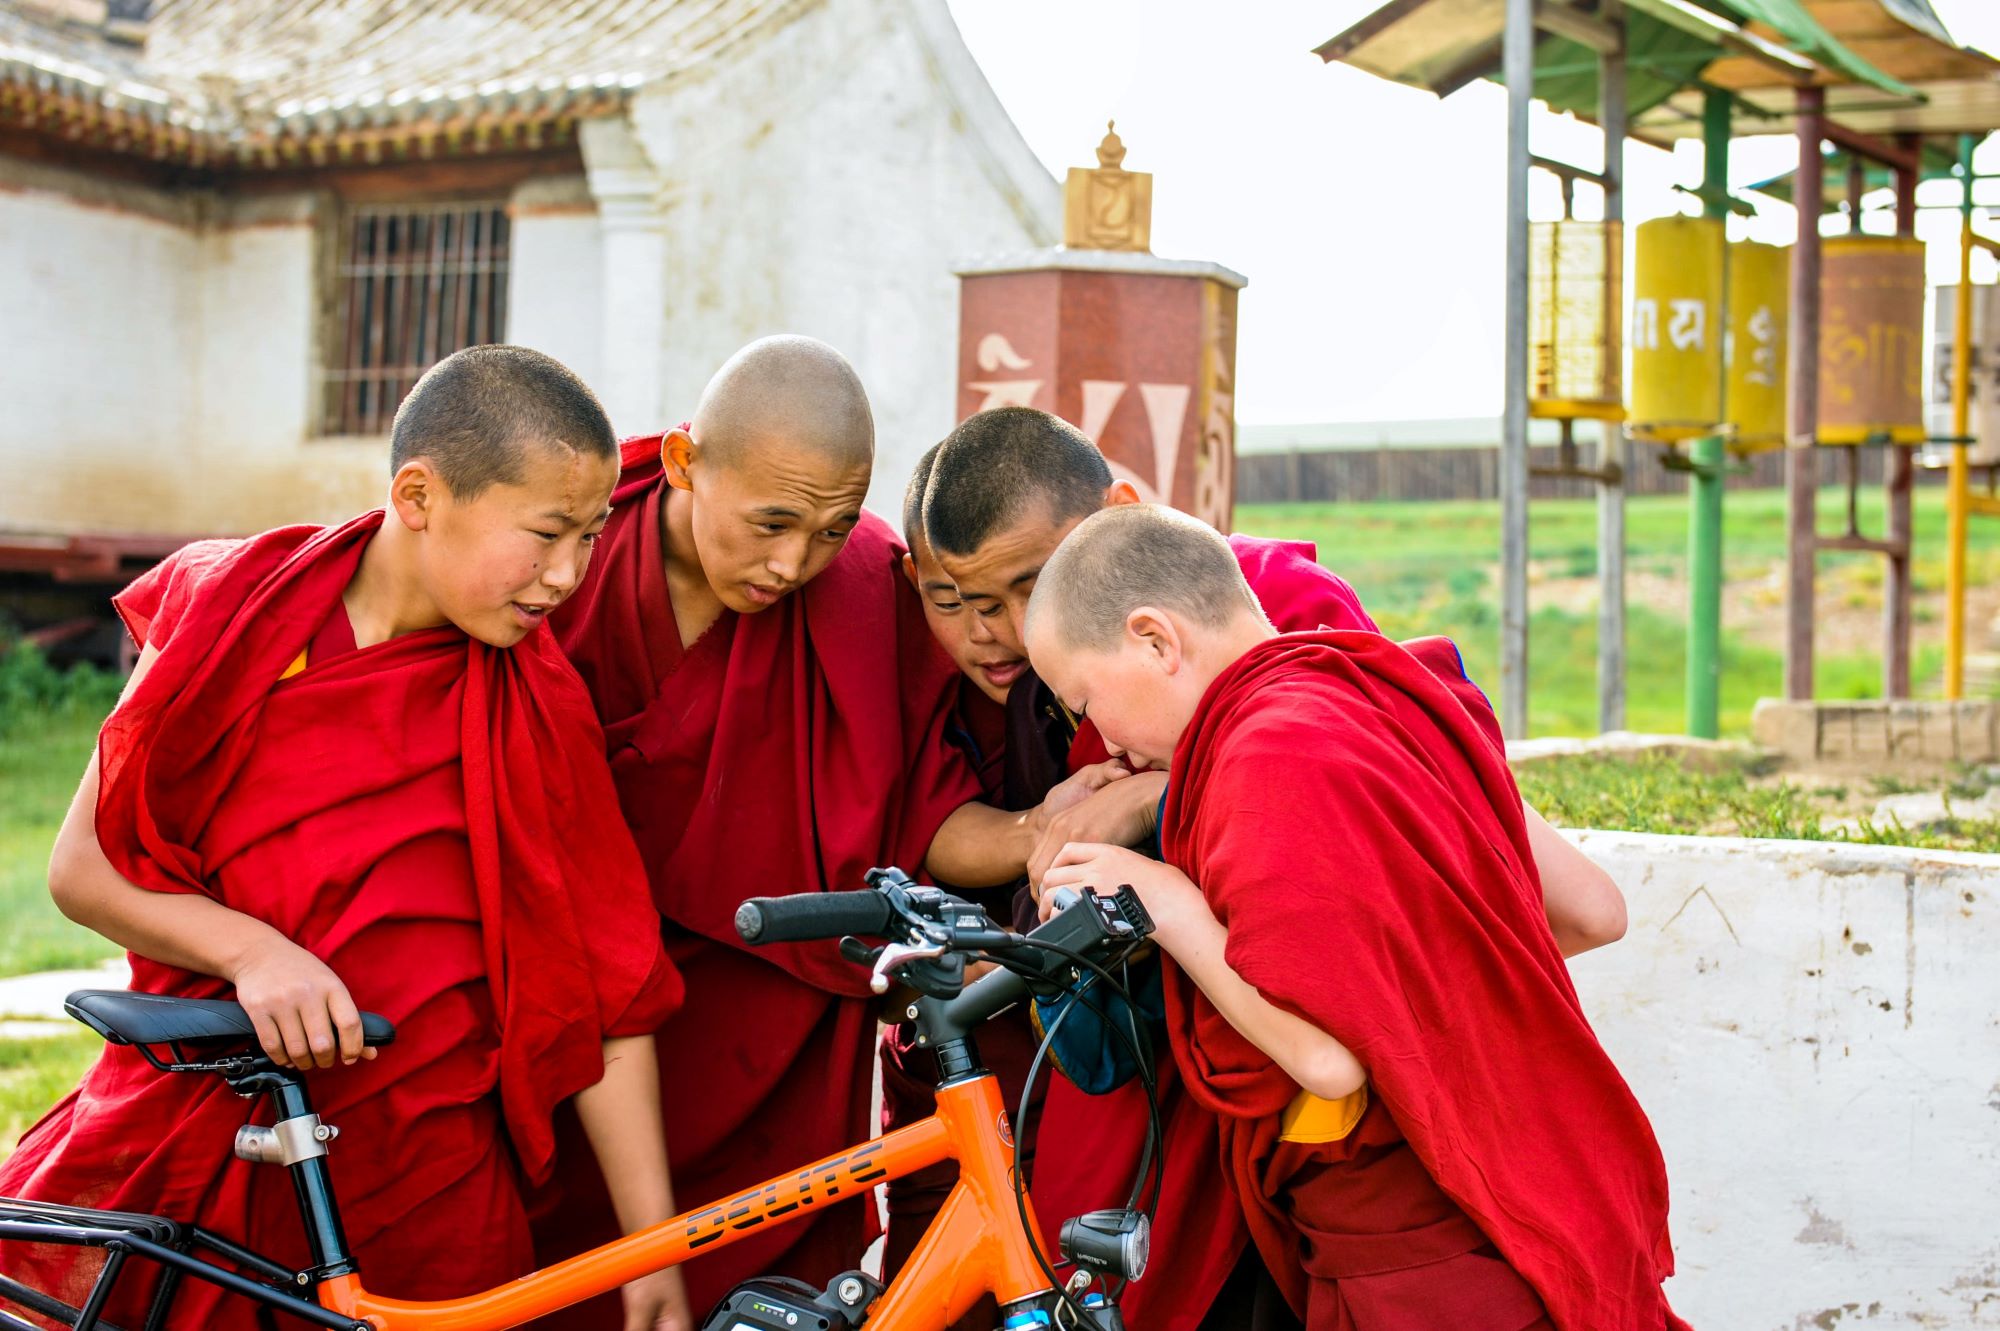 50 ways to cycle the world: monks bicycle